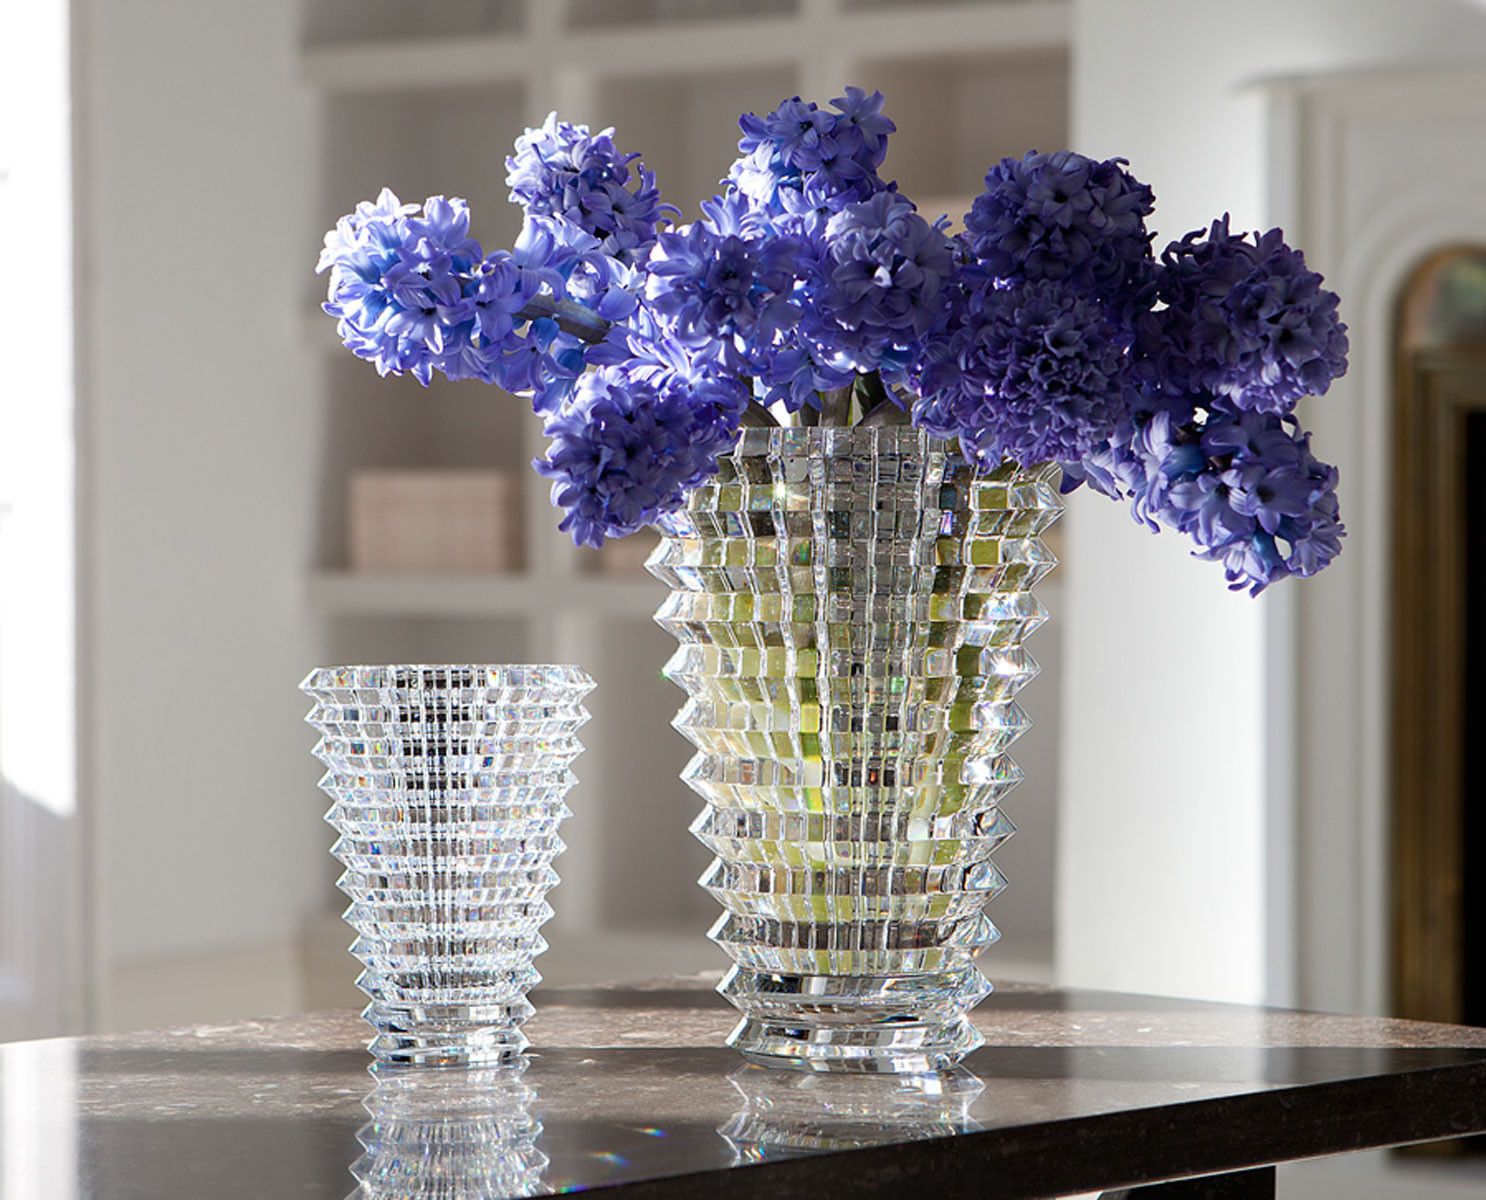 24 attractive Blue Table Vase 2024 free download blue table vase of small vase flower ideas flowers healthy inside vases design pictures blue flower baccarat crystal vase two diffe size large and small simple